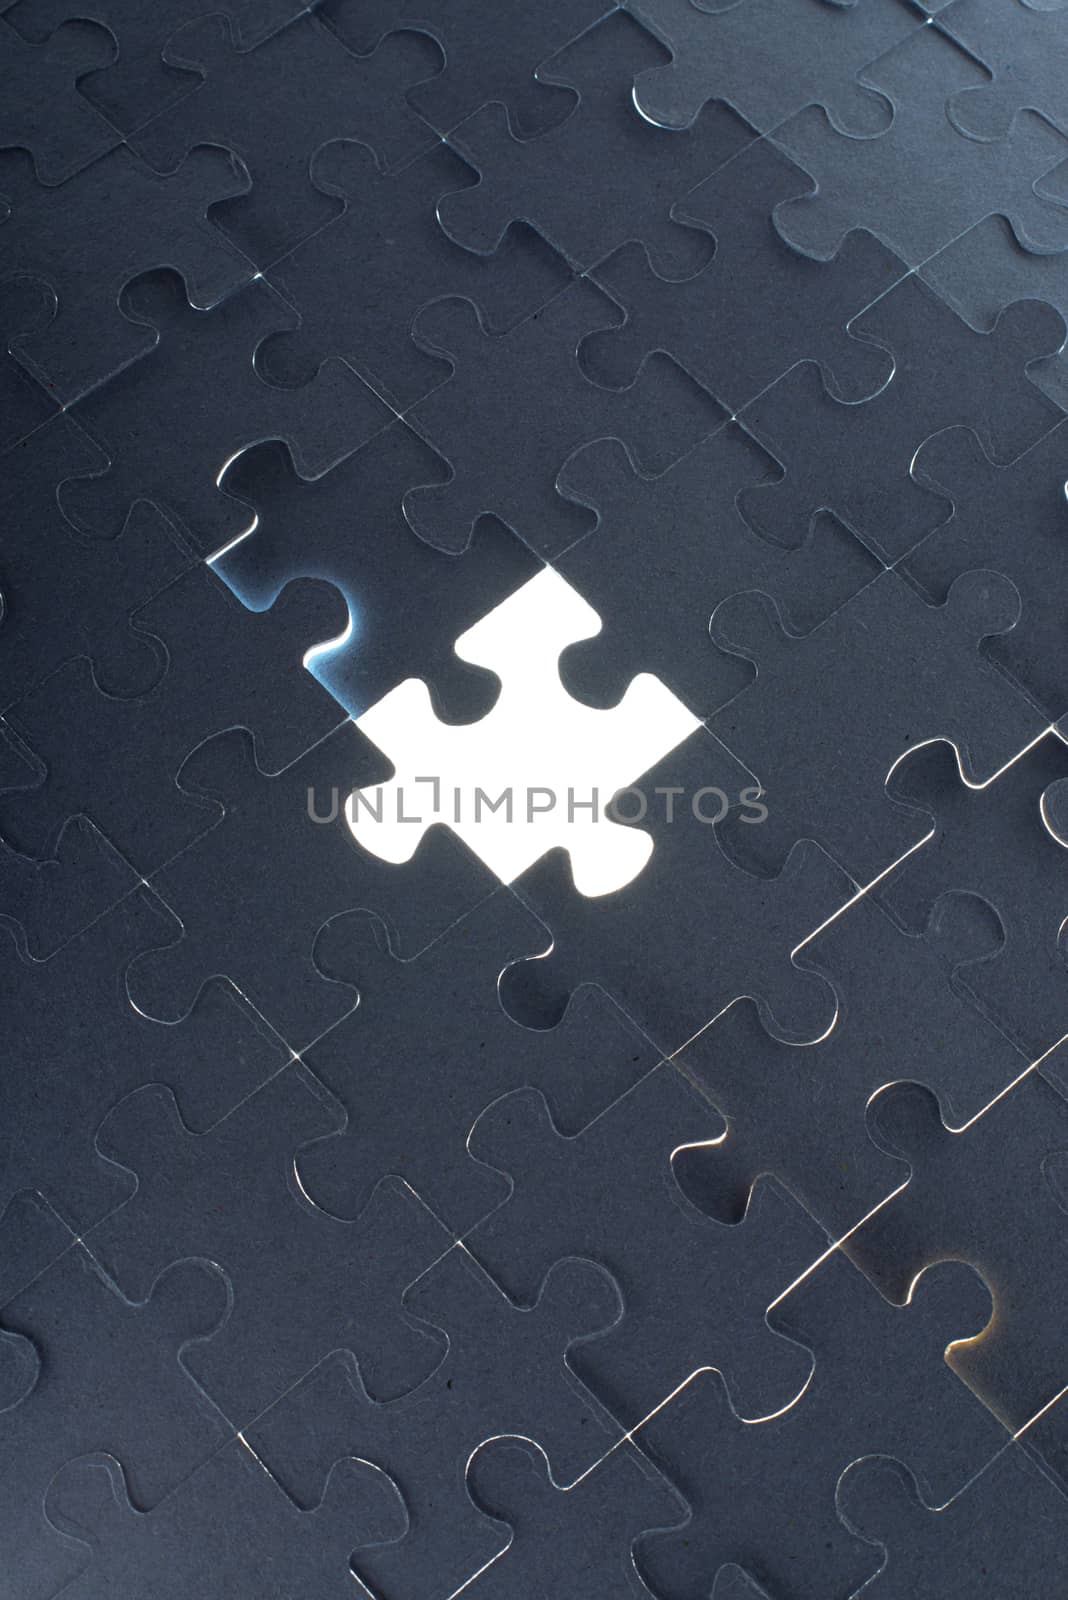 Missing jigsaw puzzle piece for completing the final puzzle piece, white space